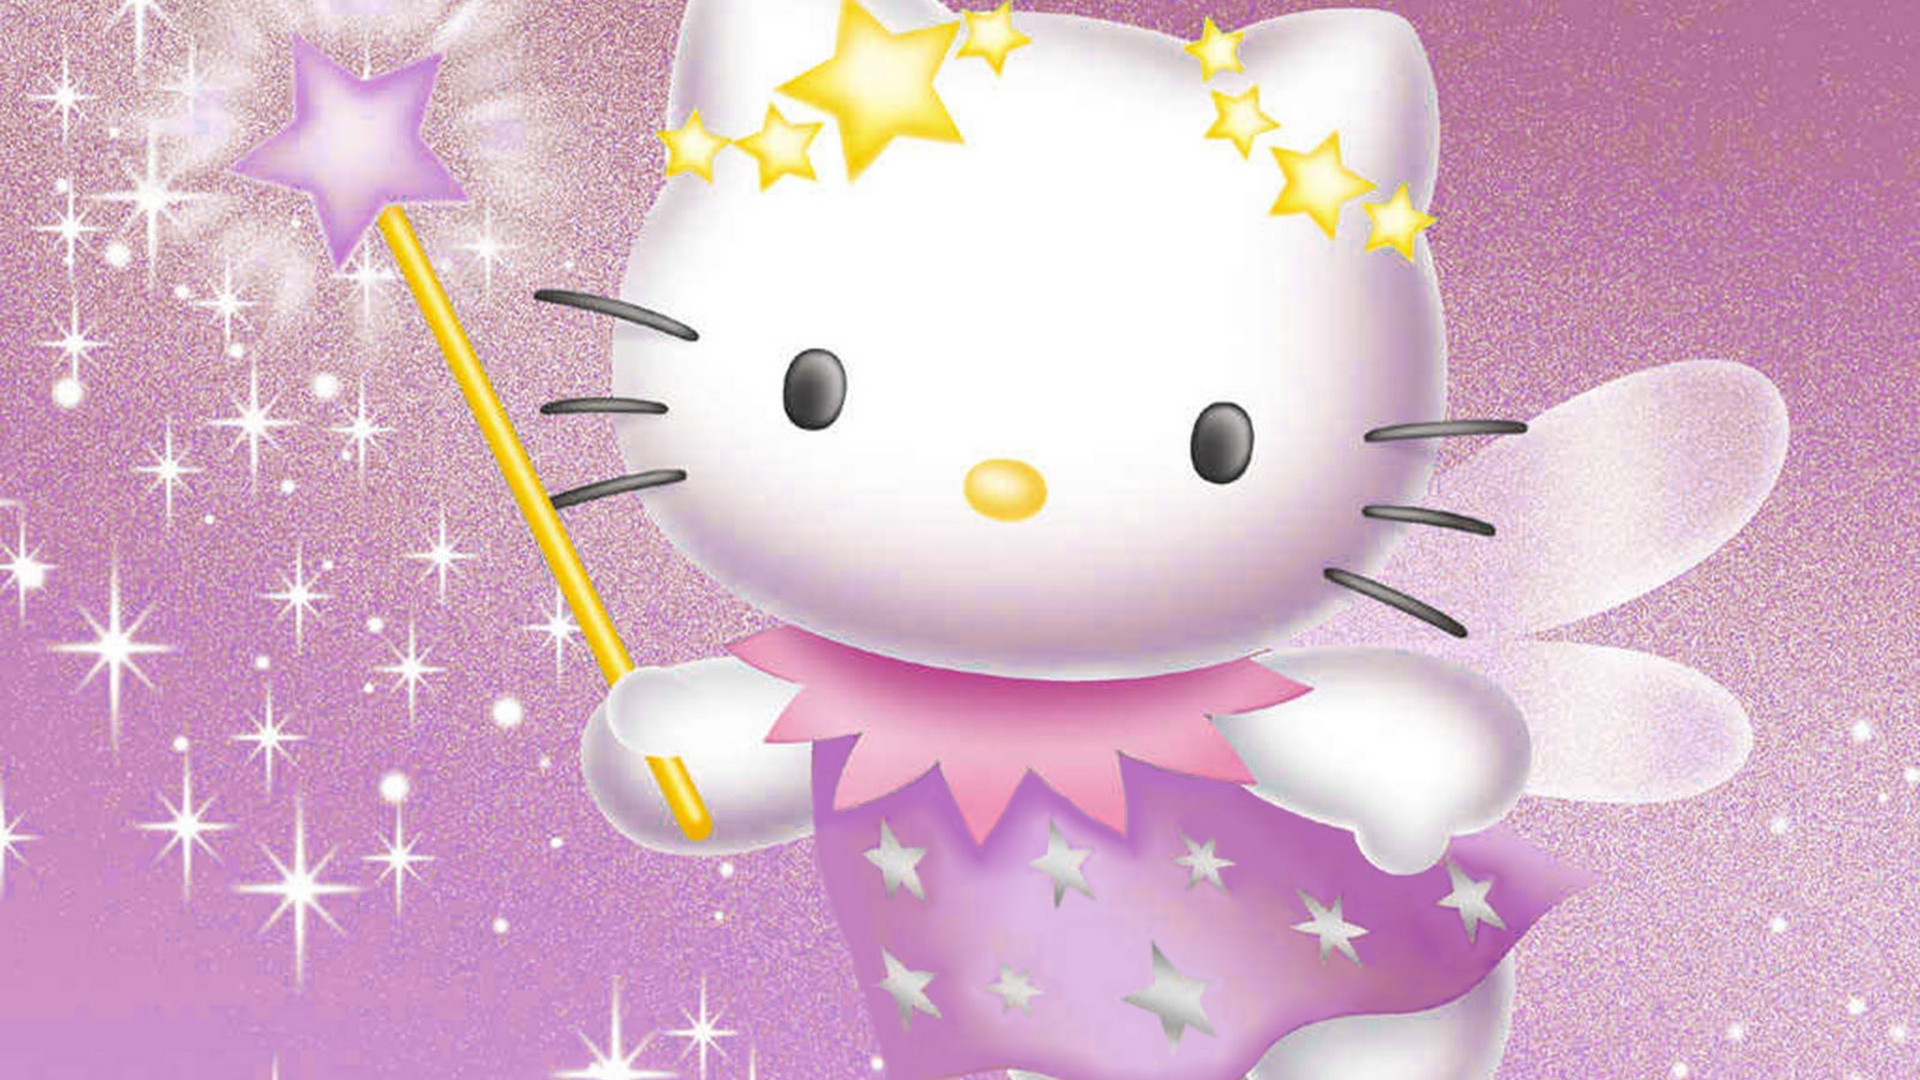 Sanrio Hello Kitty Desktop Backgrounds HD with resolution 1920X1080 pixel. You can use this wallpaper as background for your desktop Computer Screensavers, Android or iPhone smartphones